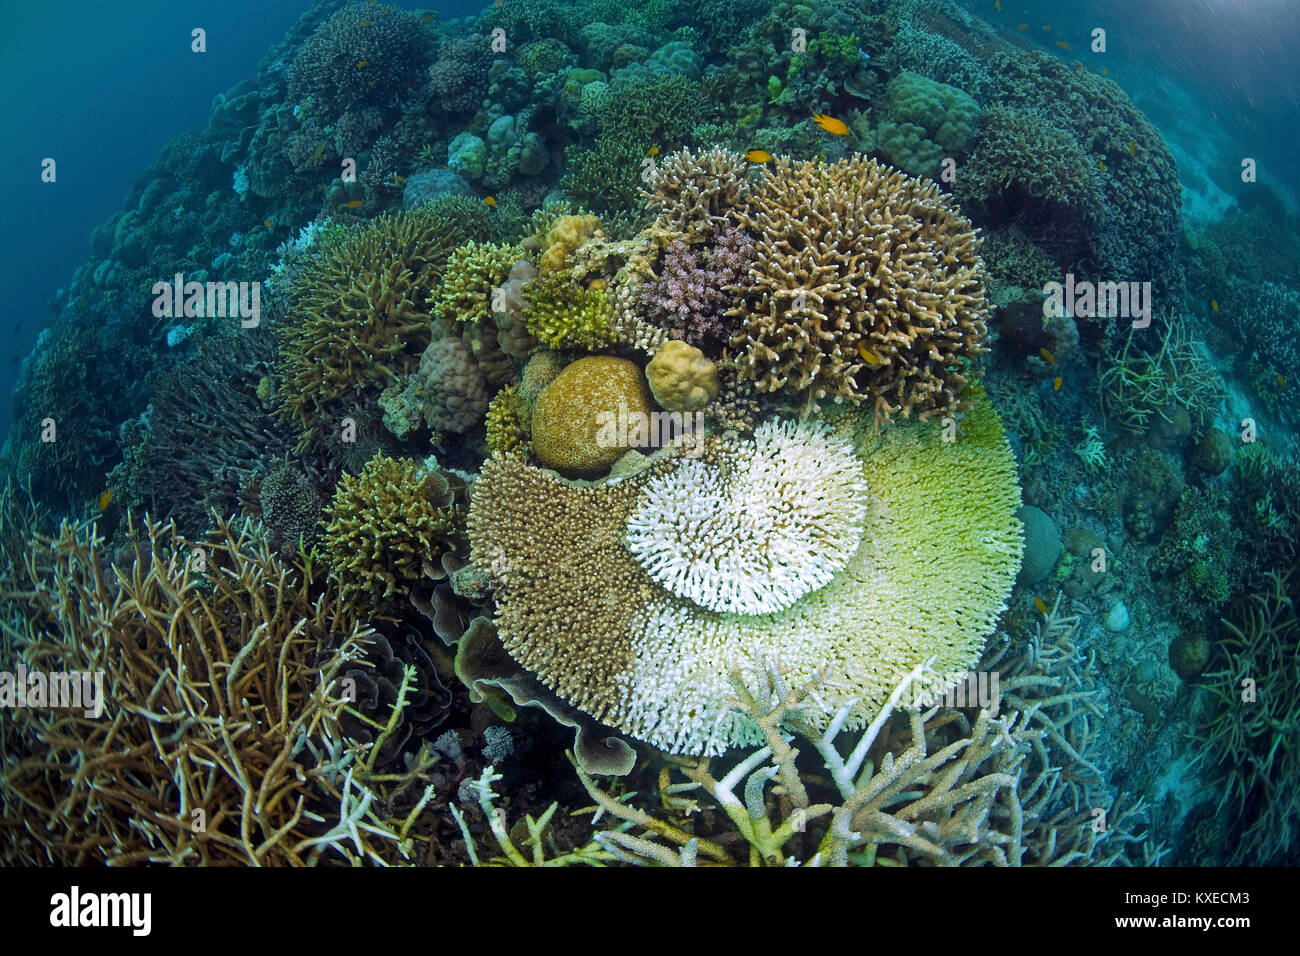 Bleached stone coral, coral bleaching, consequences of global warming, coral reef at Maldives islands, Indian ocean, Asia Stock Photo